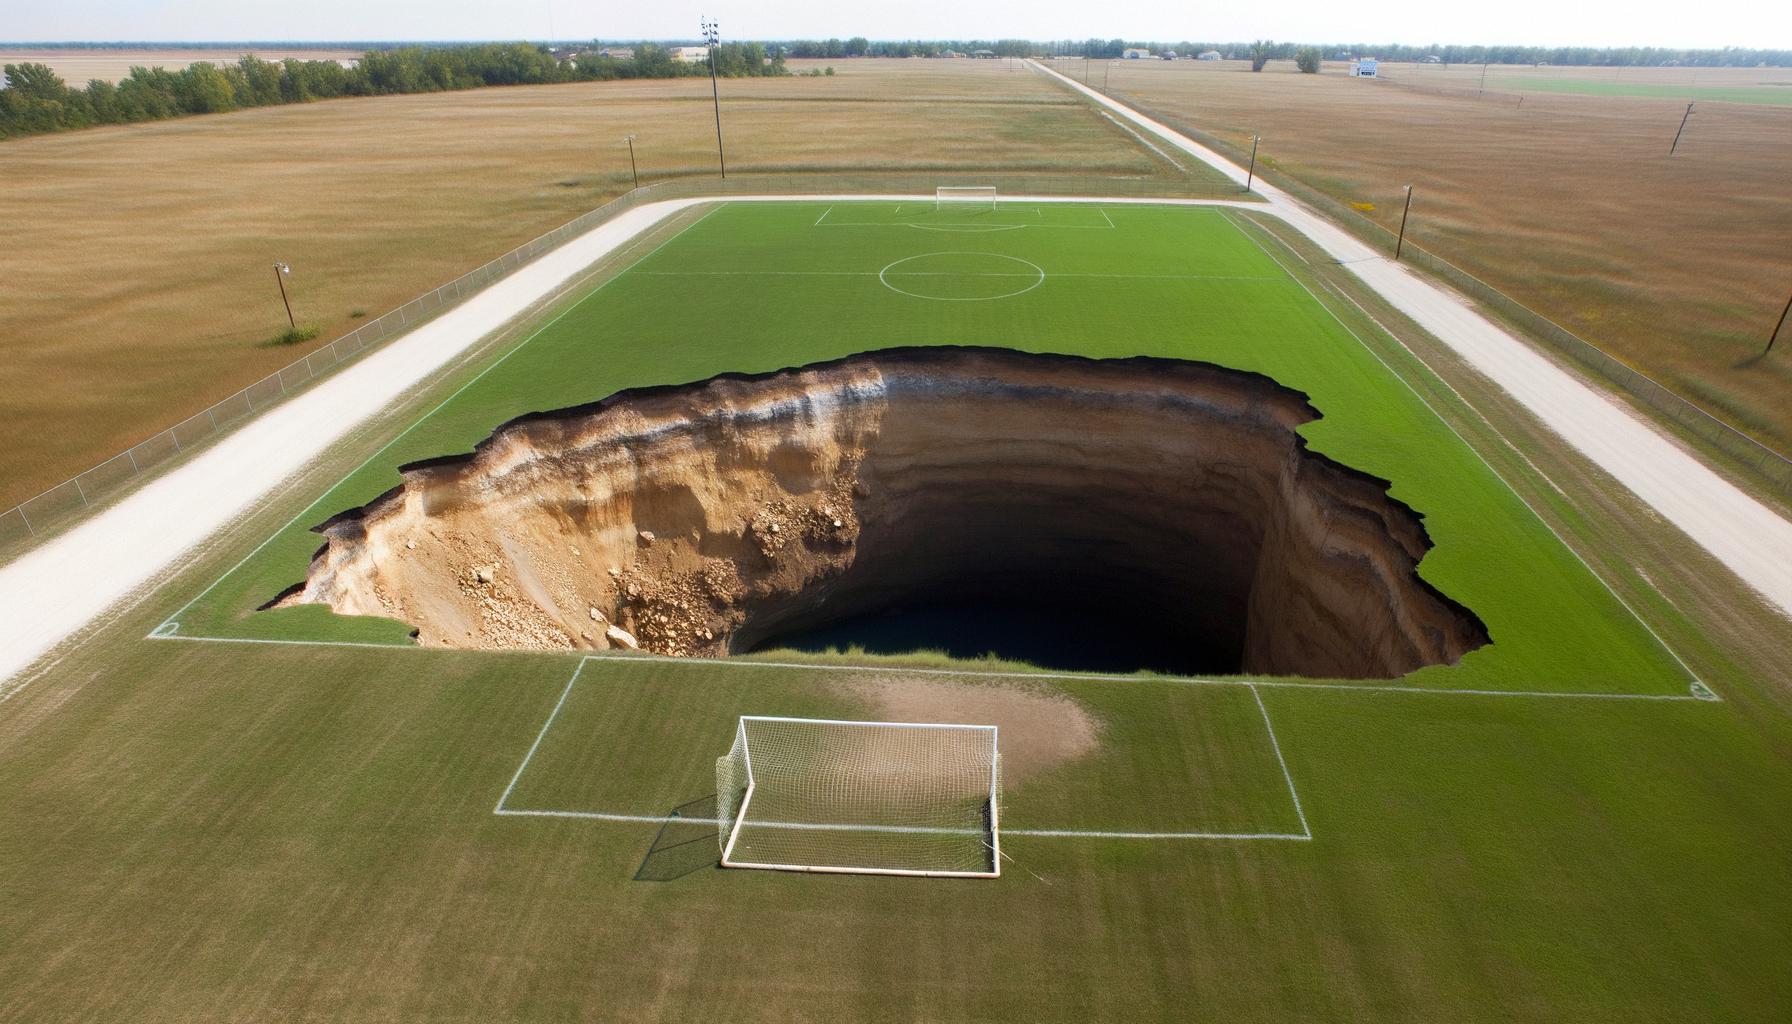 Sinkhole swallows soccer field in Illinois due to mine collapse Balanced News